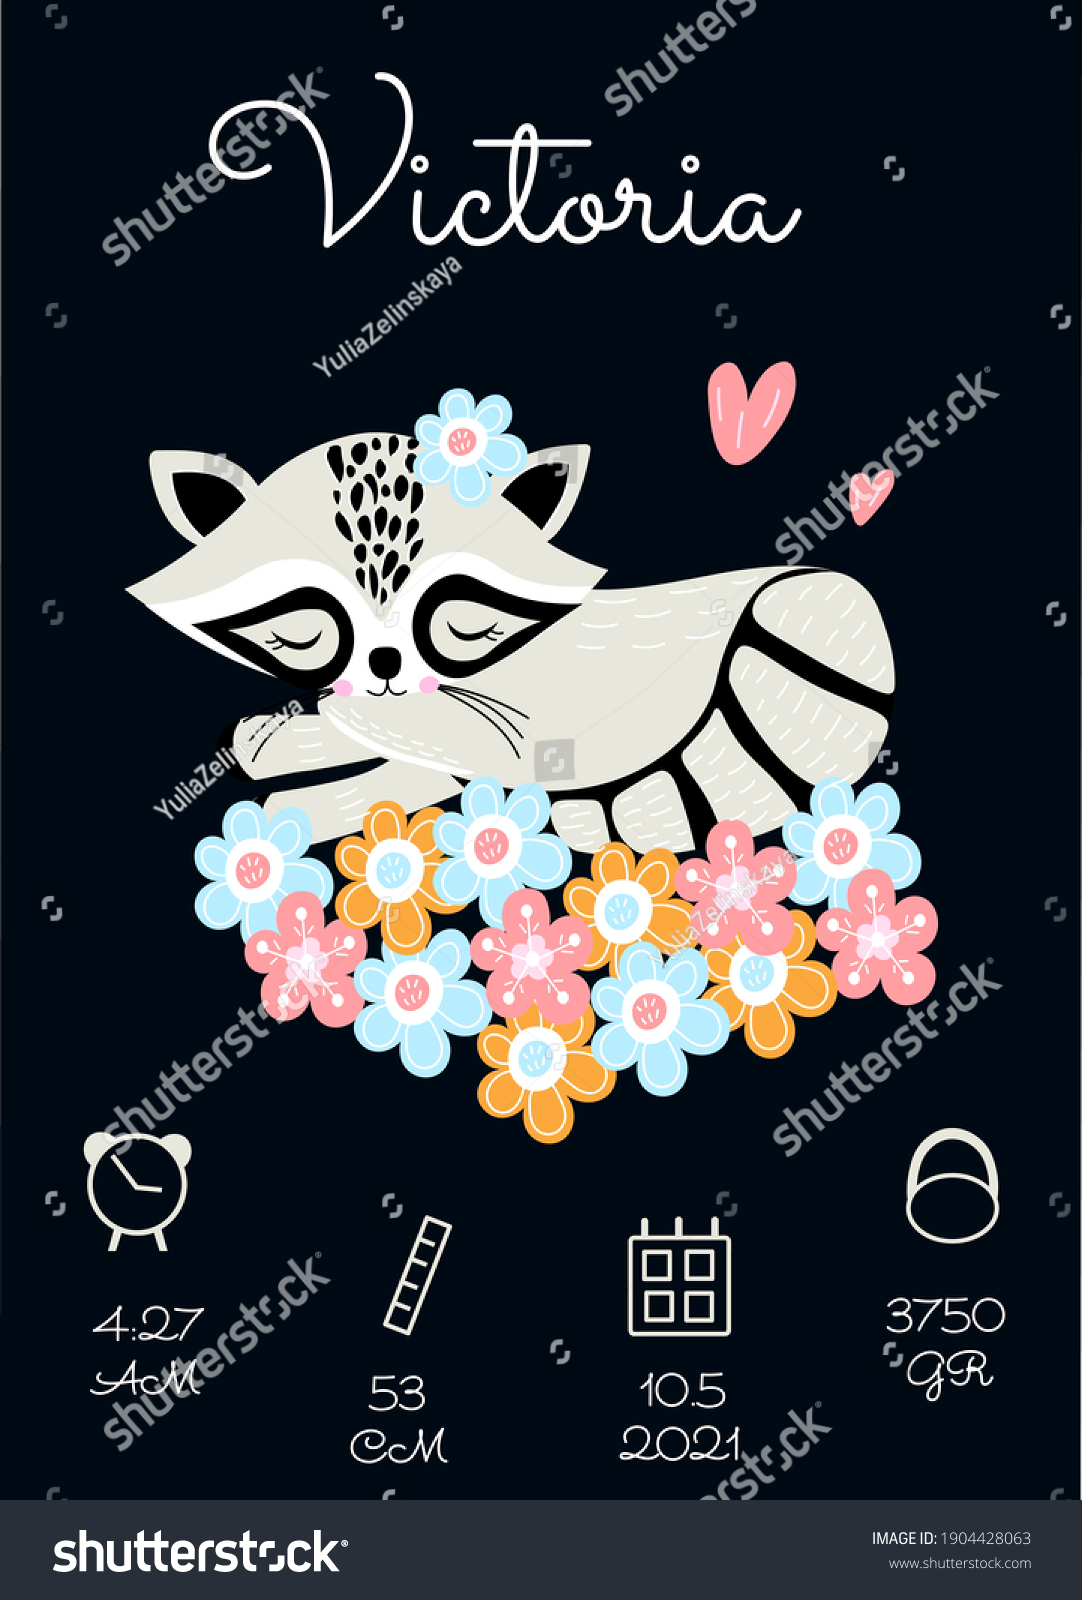 SVG of Personalize newborn baby metric poster with raccoon. Date, cm, gr, time. svg